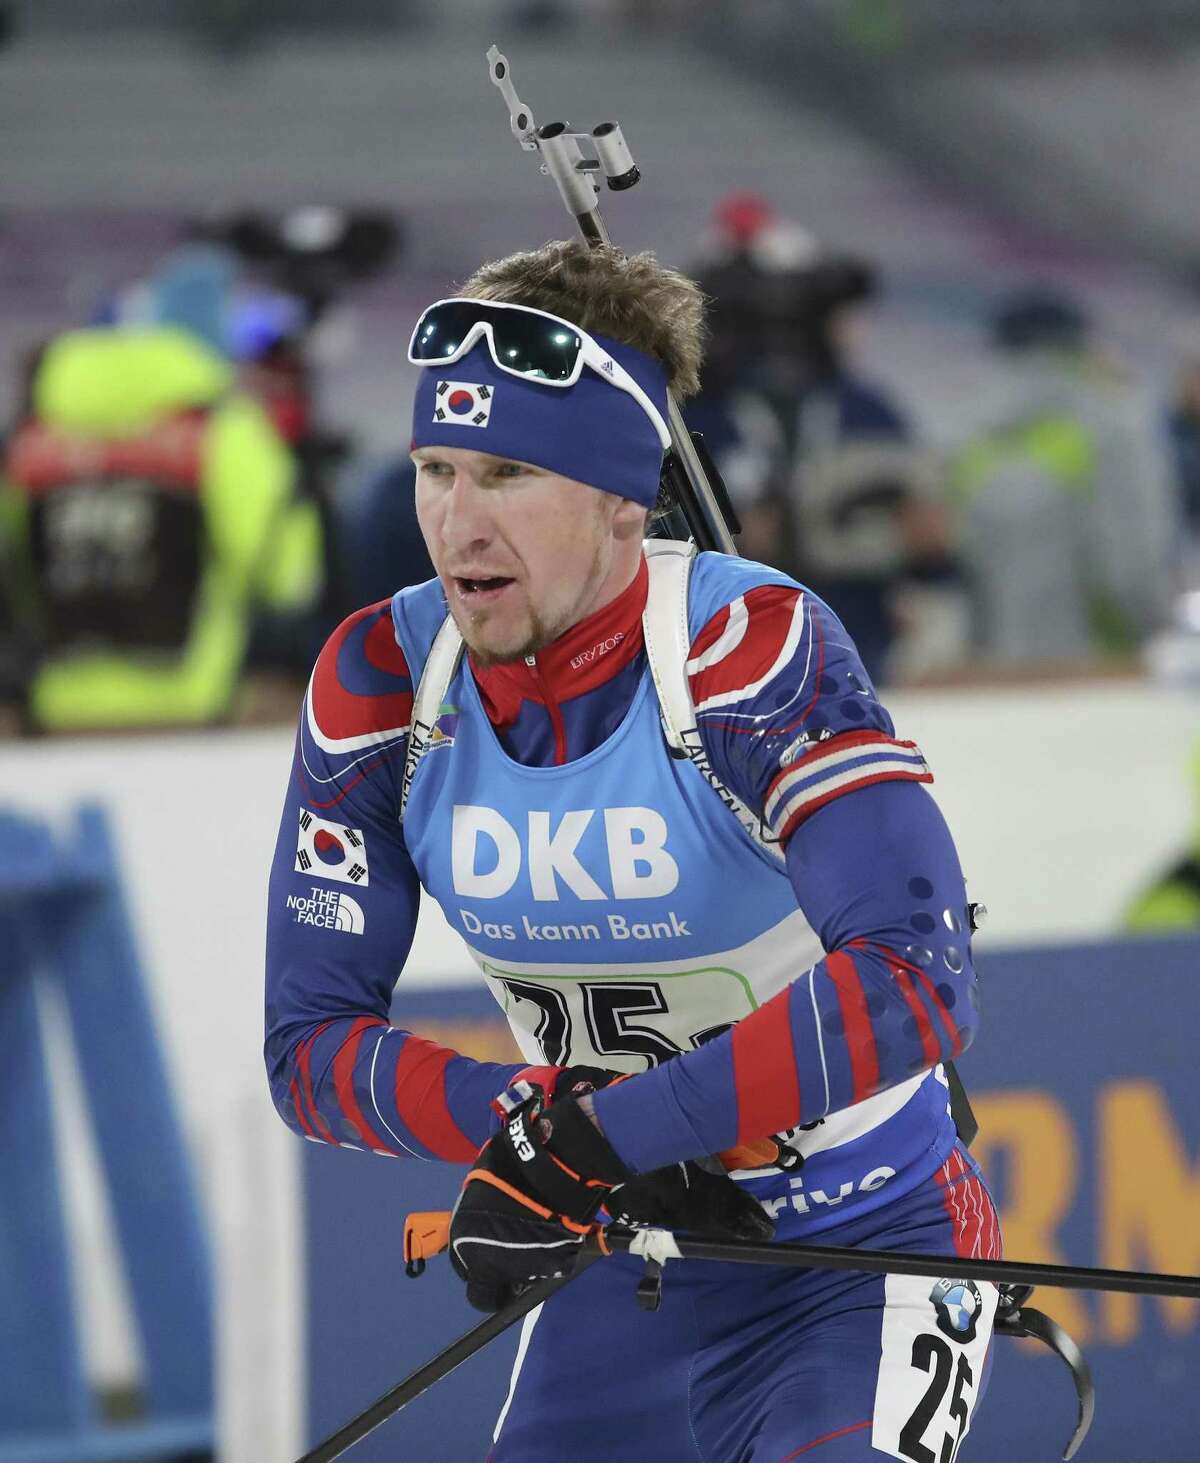 In this Sunday, March 5, 2017 photo, Naturalized biathlete Timofei Lapshin competes during the men's 4x7.5 km relay competition for the Biathlon World Cup at the Alpensia Biathlon Centre in Pyeongchang, South Korea. Biathlete Lapshin said he?’s now known as ?“the Russian Viktor Ahn?” after making the switch in reverse. Lapshin is a talented athlete, with a smattering of podium finishes on the World Cup circuit, but struggled to make the highly-competitive Russian team. After a super-fast naturalization process - he says the first enquiries were made only in September - he now holds a South Korean passport. (AP Photo/Lee Jin-man)